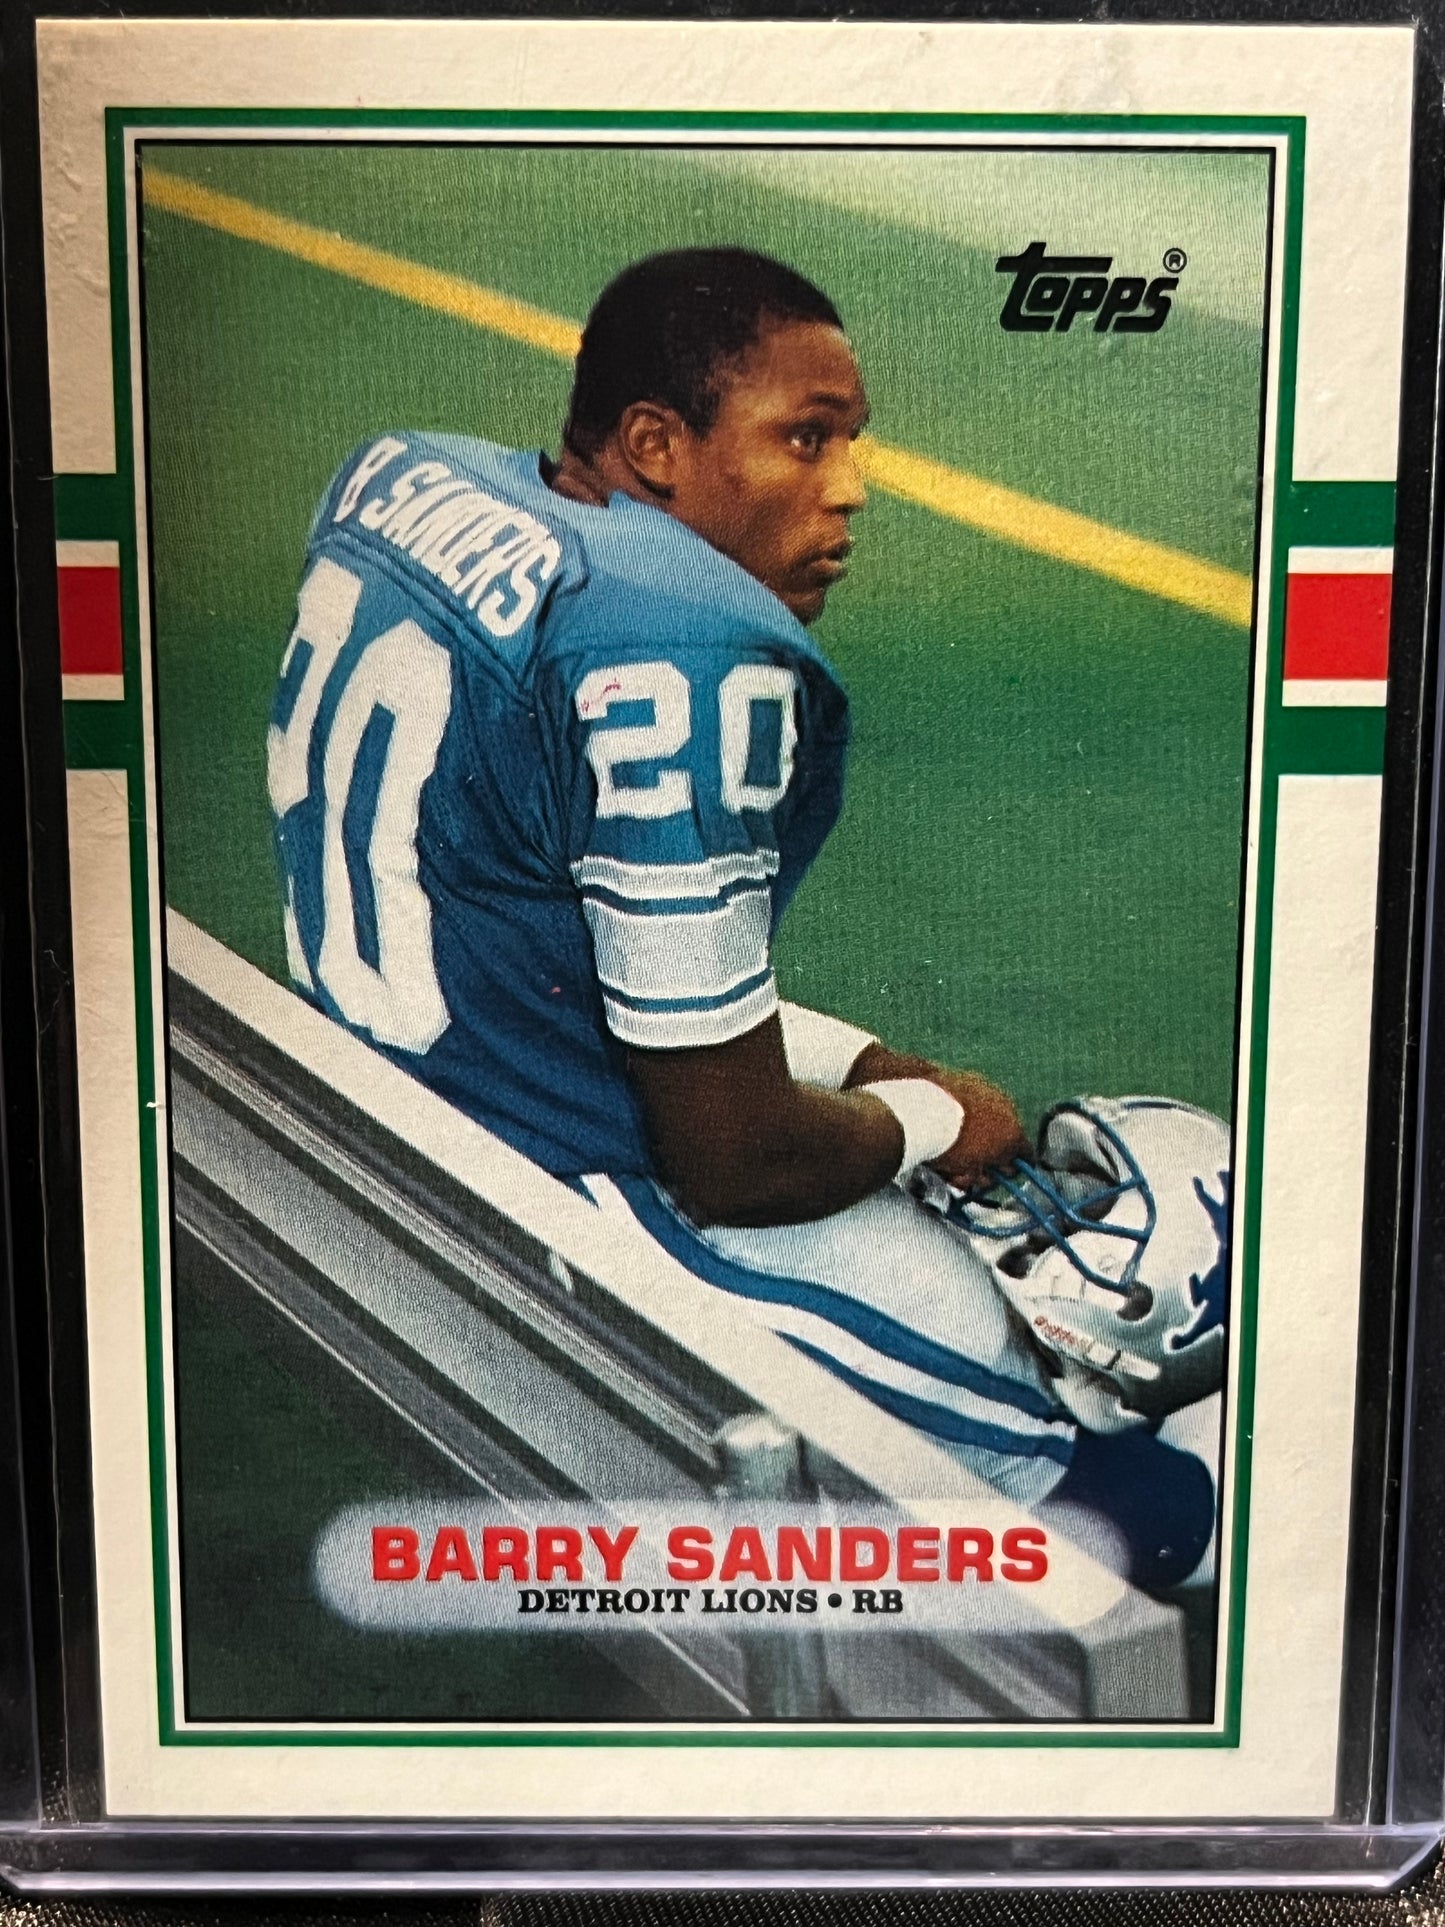 1989 Topps Traded Barry Sanders RC